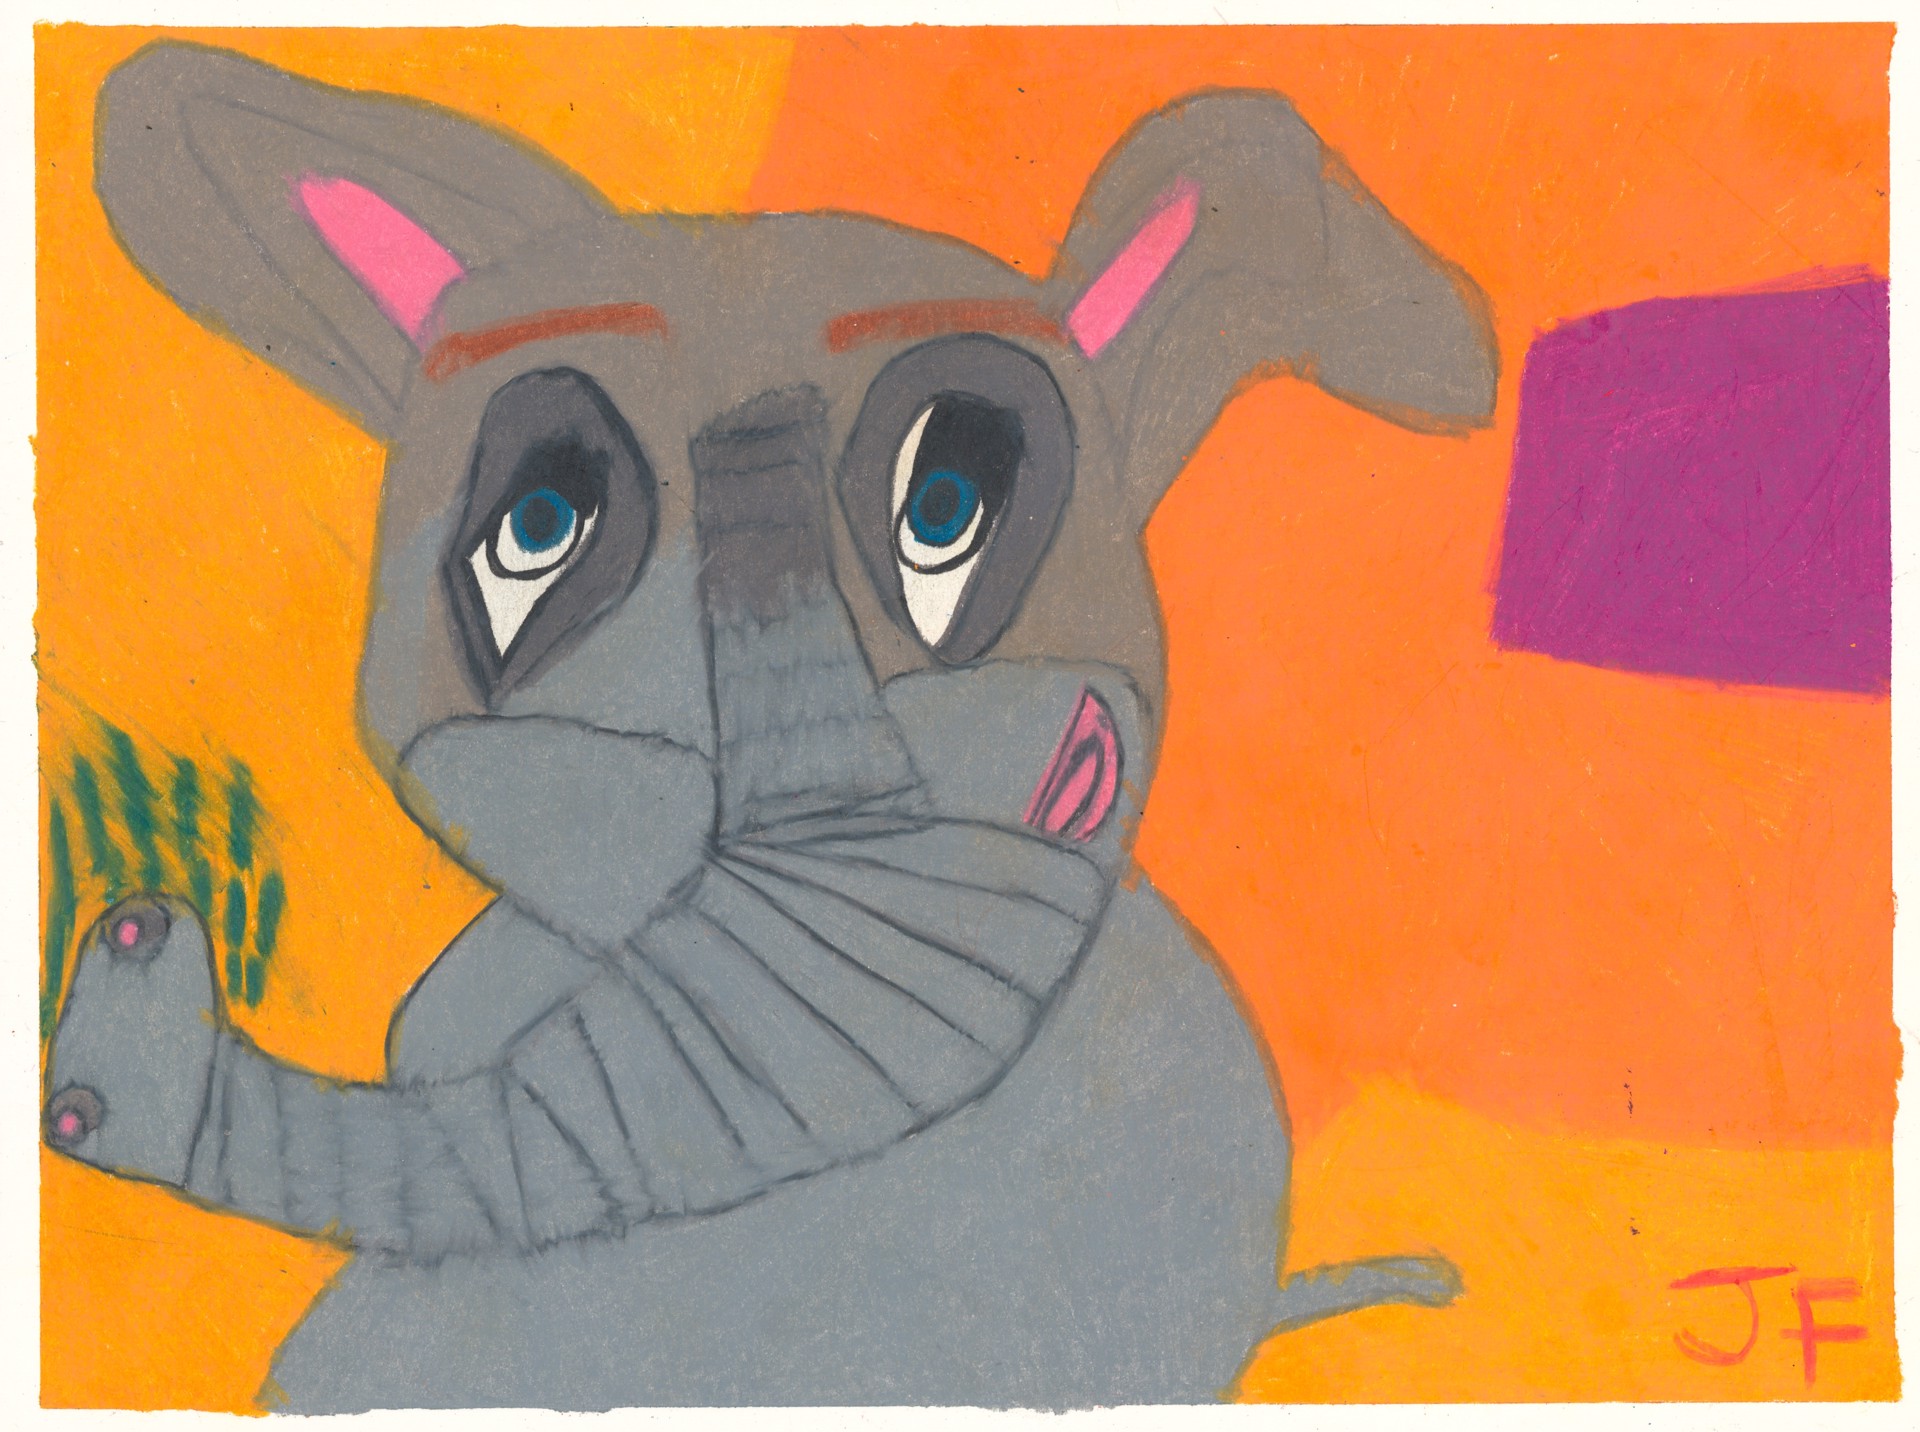 Actually an Elephant by Josephine Finnell